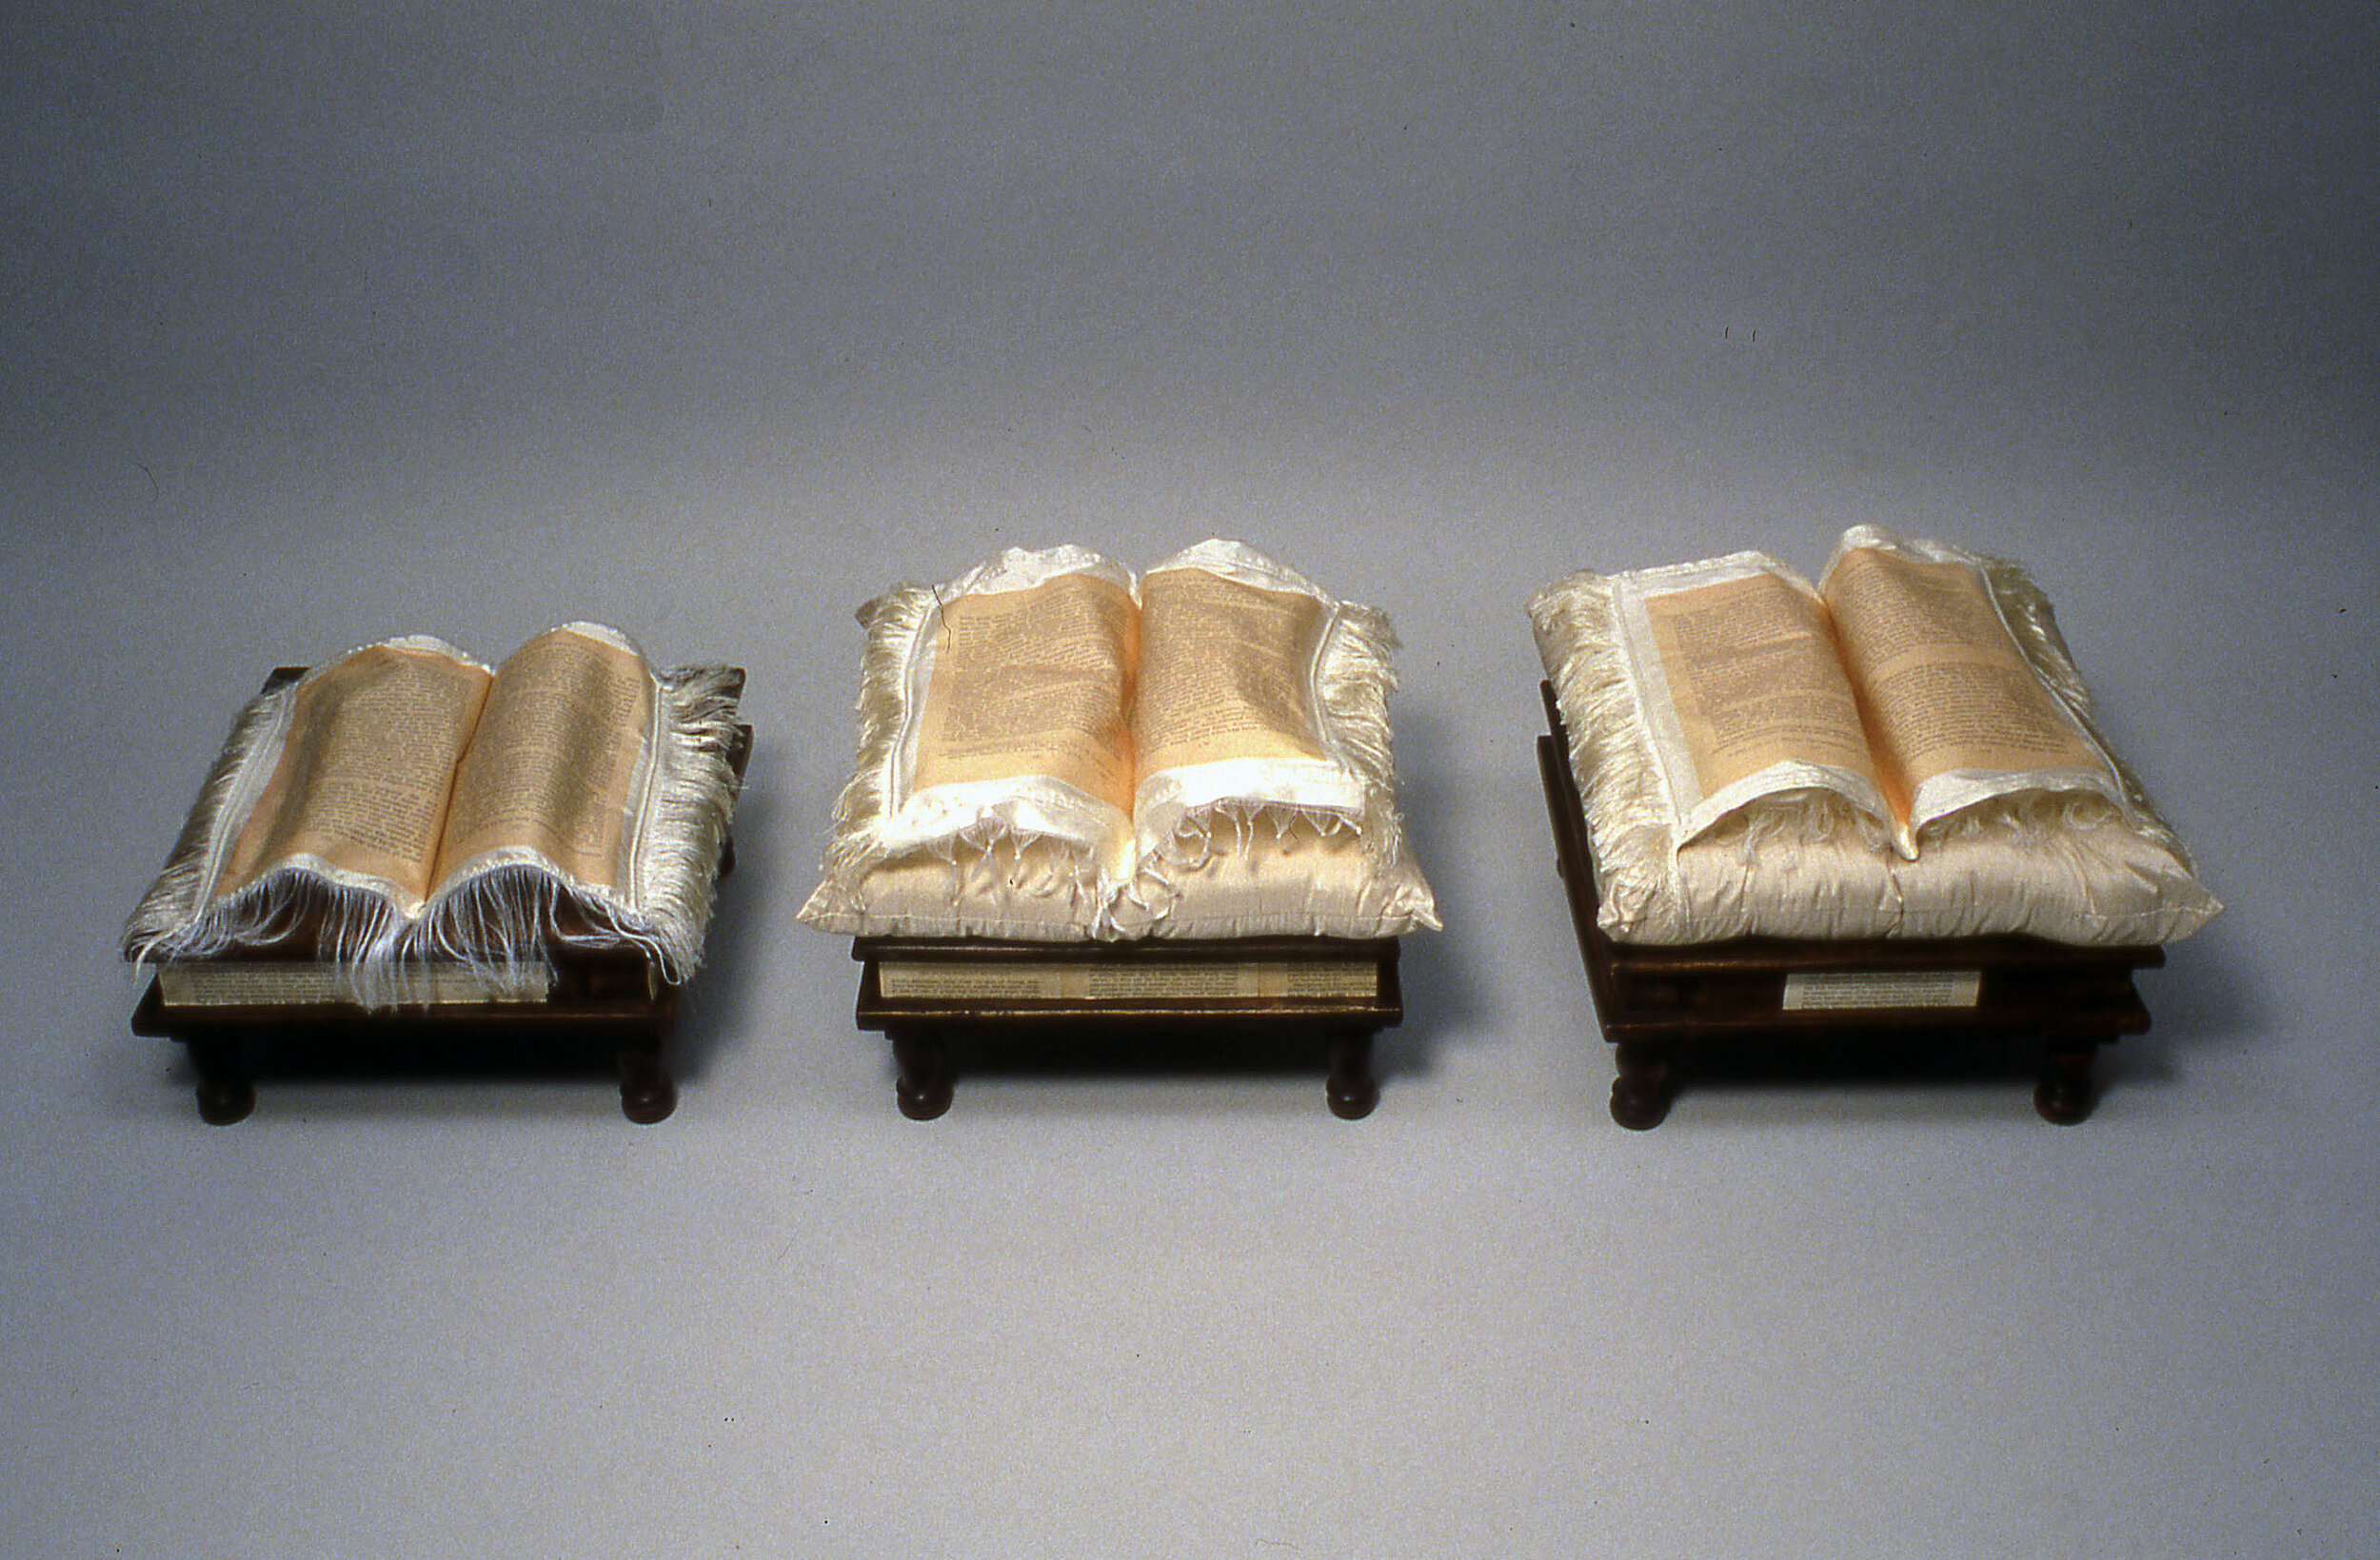 Three Footstools for 'Sex In the World's Religions'